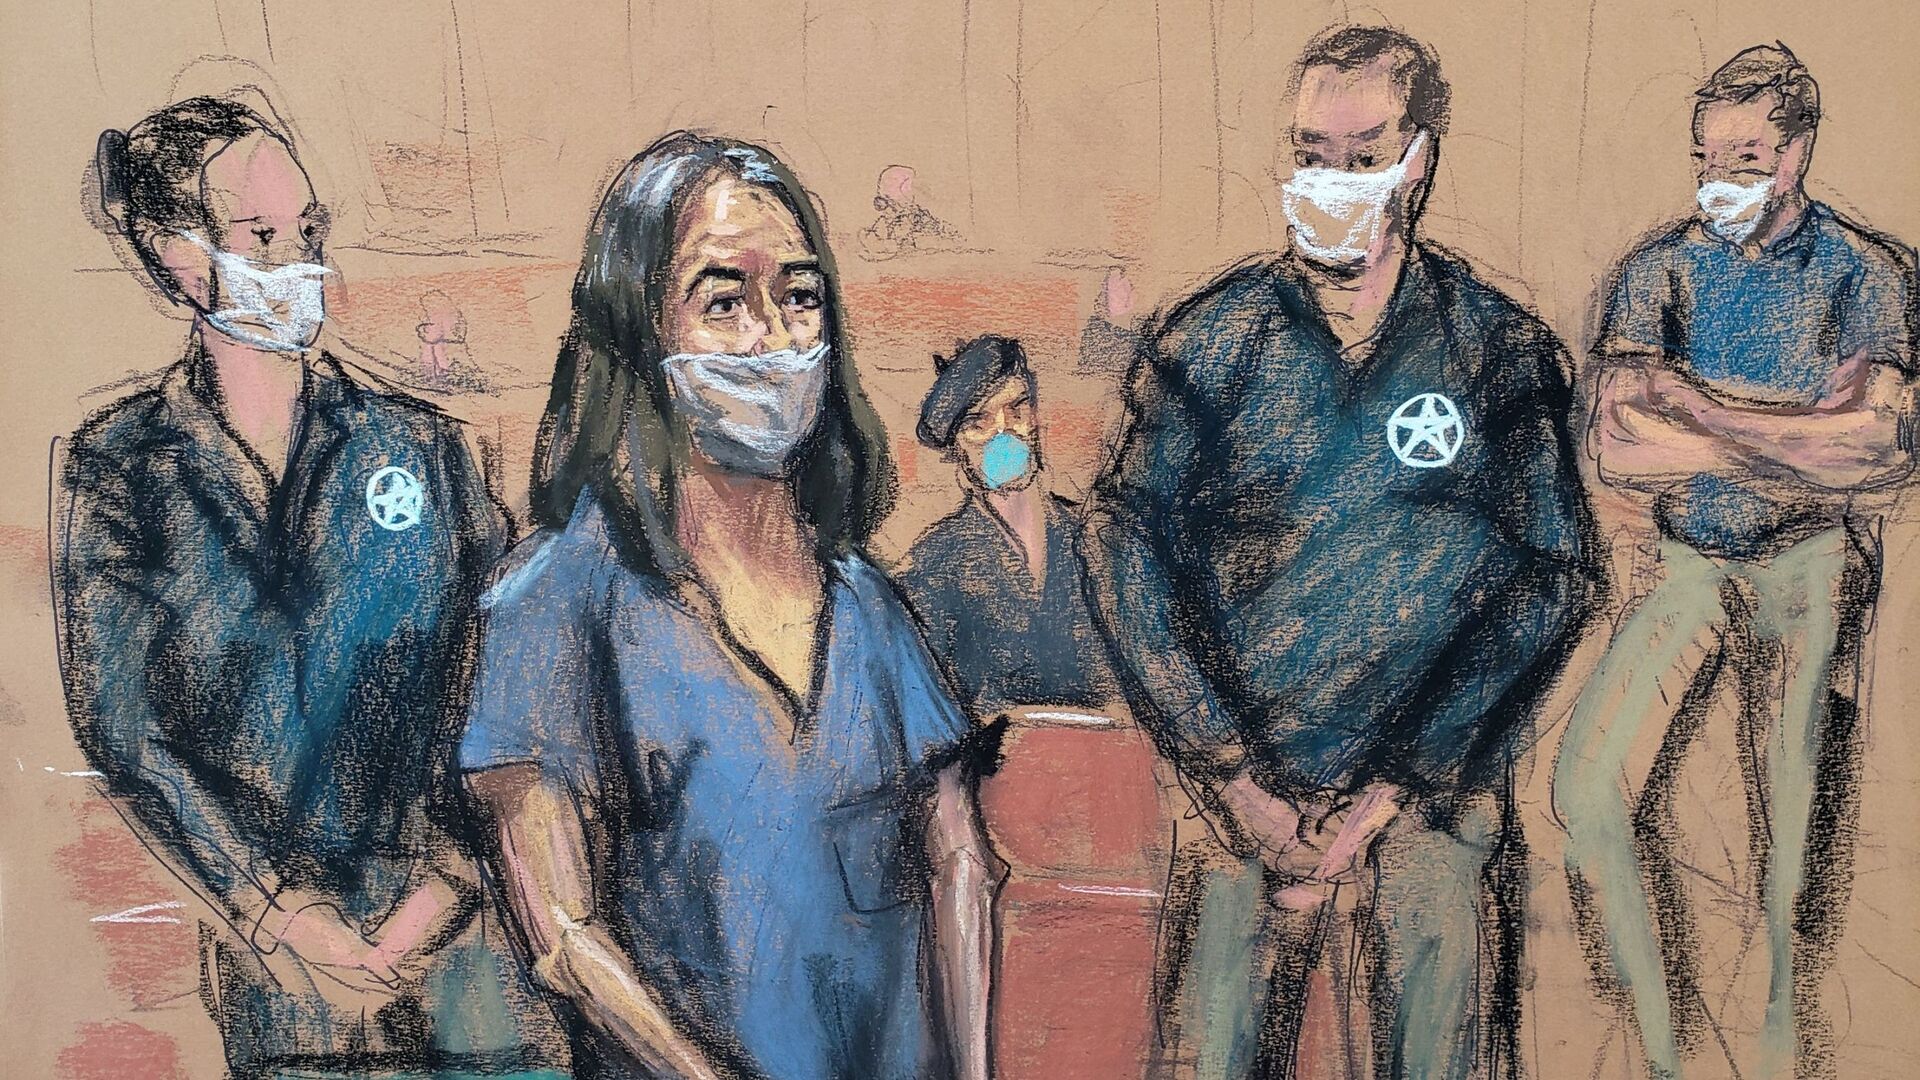 British socialite Ghislaine Maxwell appears during her arraignment hearing on a new indictment at Manhattan Federal Court in New York City, New York, U.S. April 23, 2021, in this courtroom sketch. - Sputnik International, 1920, 30.04.2021